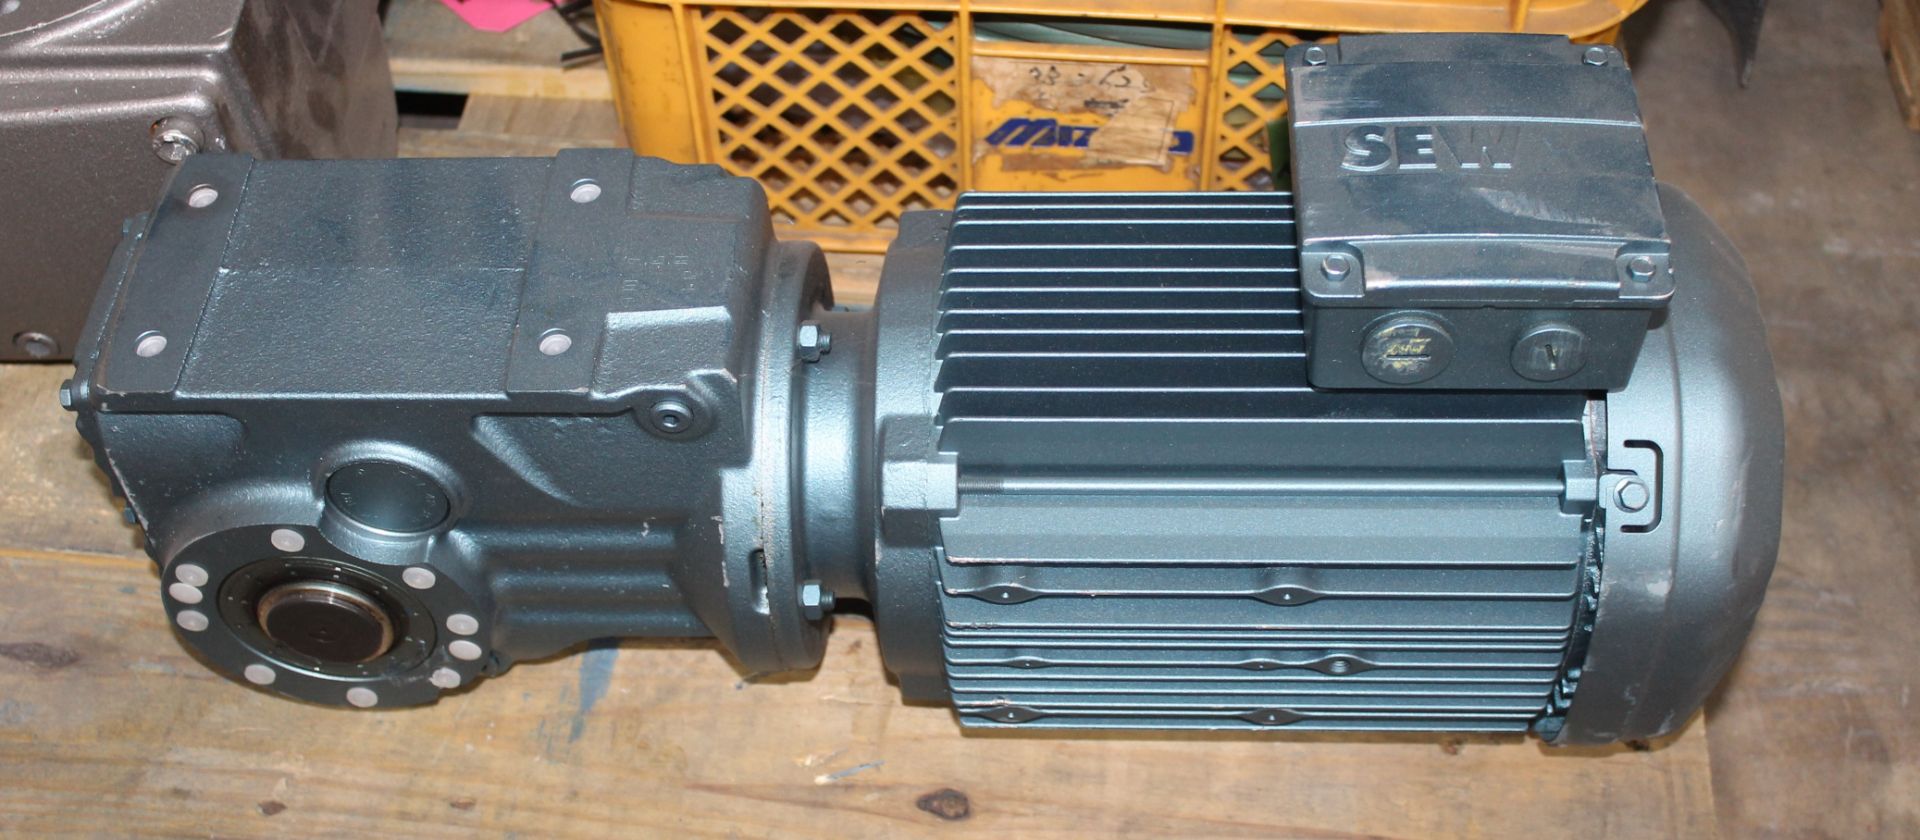 SEW EURODRIVE 3 HP MOTOR WITH GEARBOX,